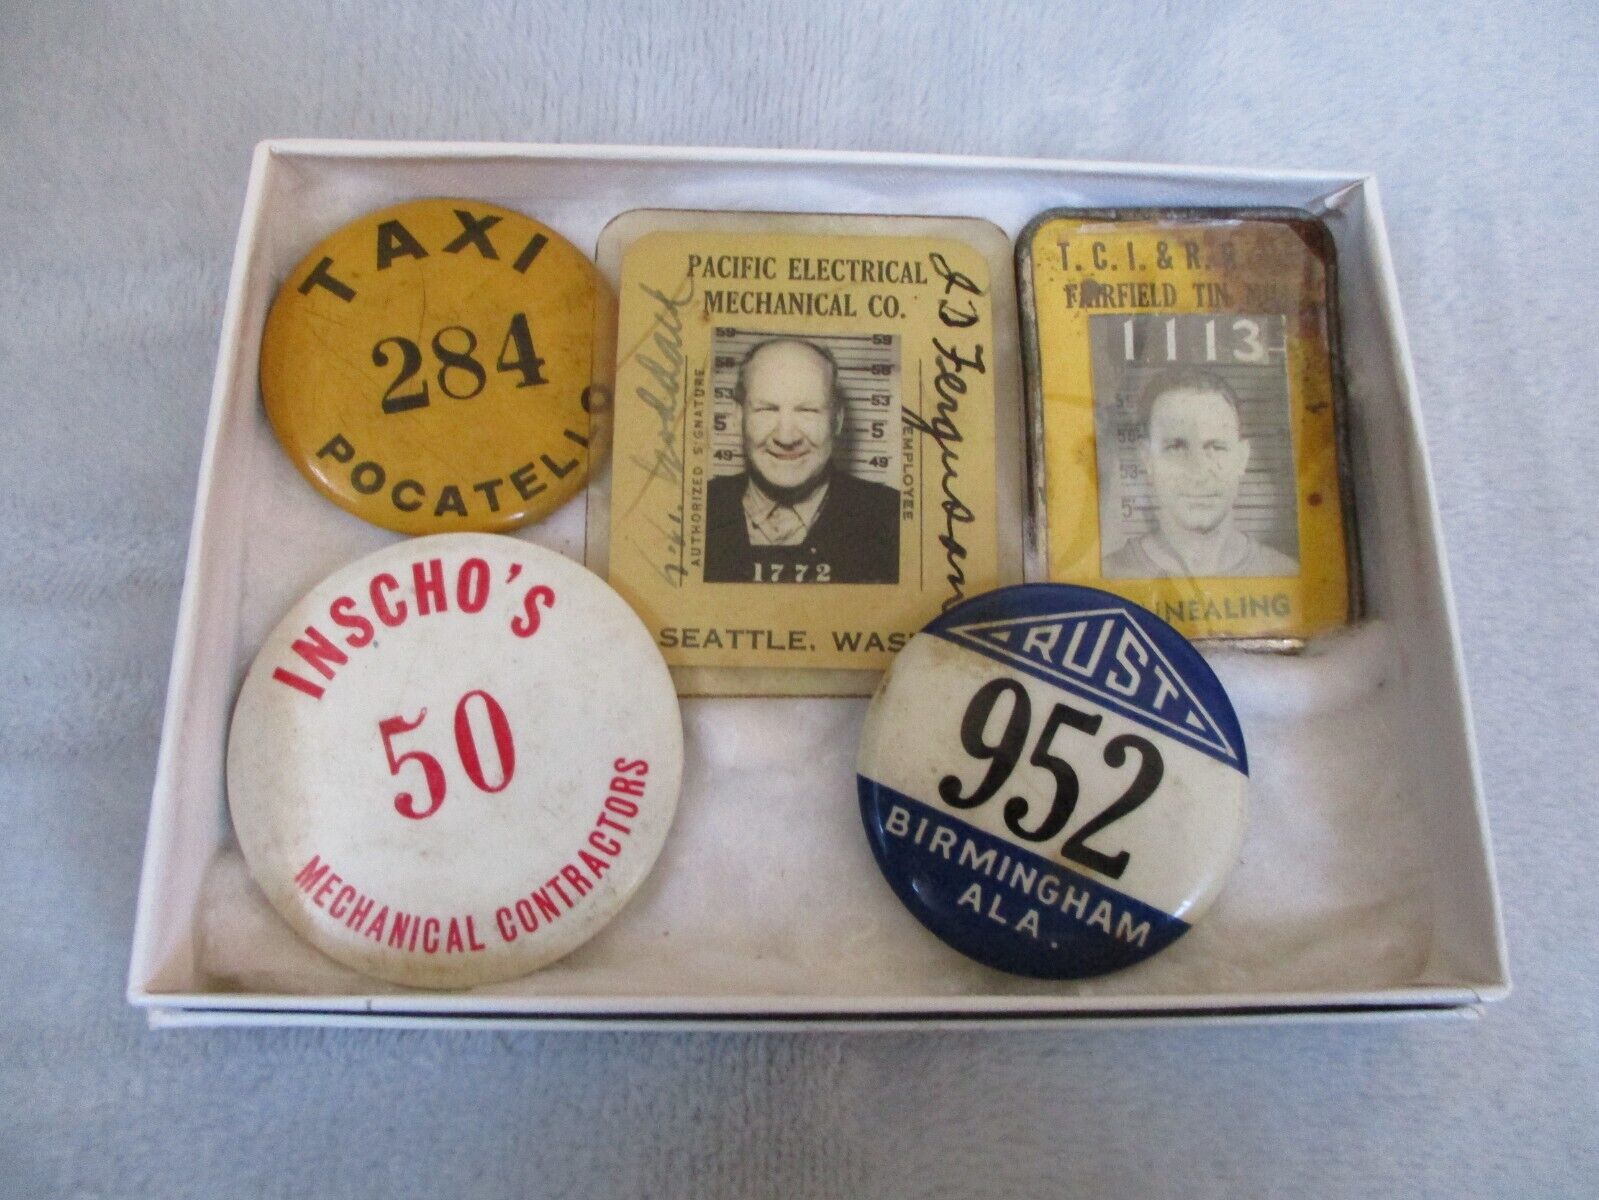 VINTAGE EMPLOYEE BADGES TAXI PACIFIC ELECTRICAL FAIRFIELD TIN MILL++ (1940s-50s)